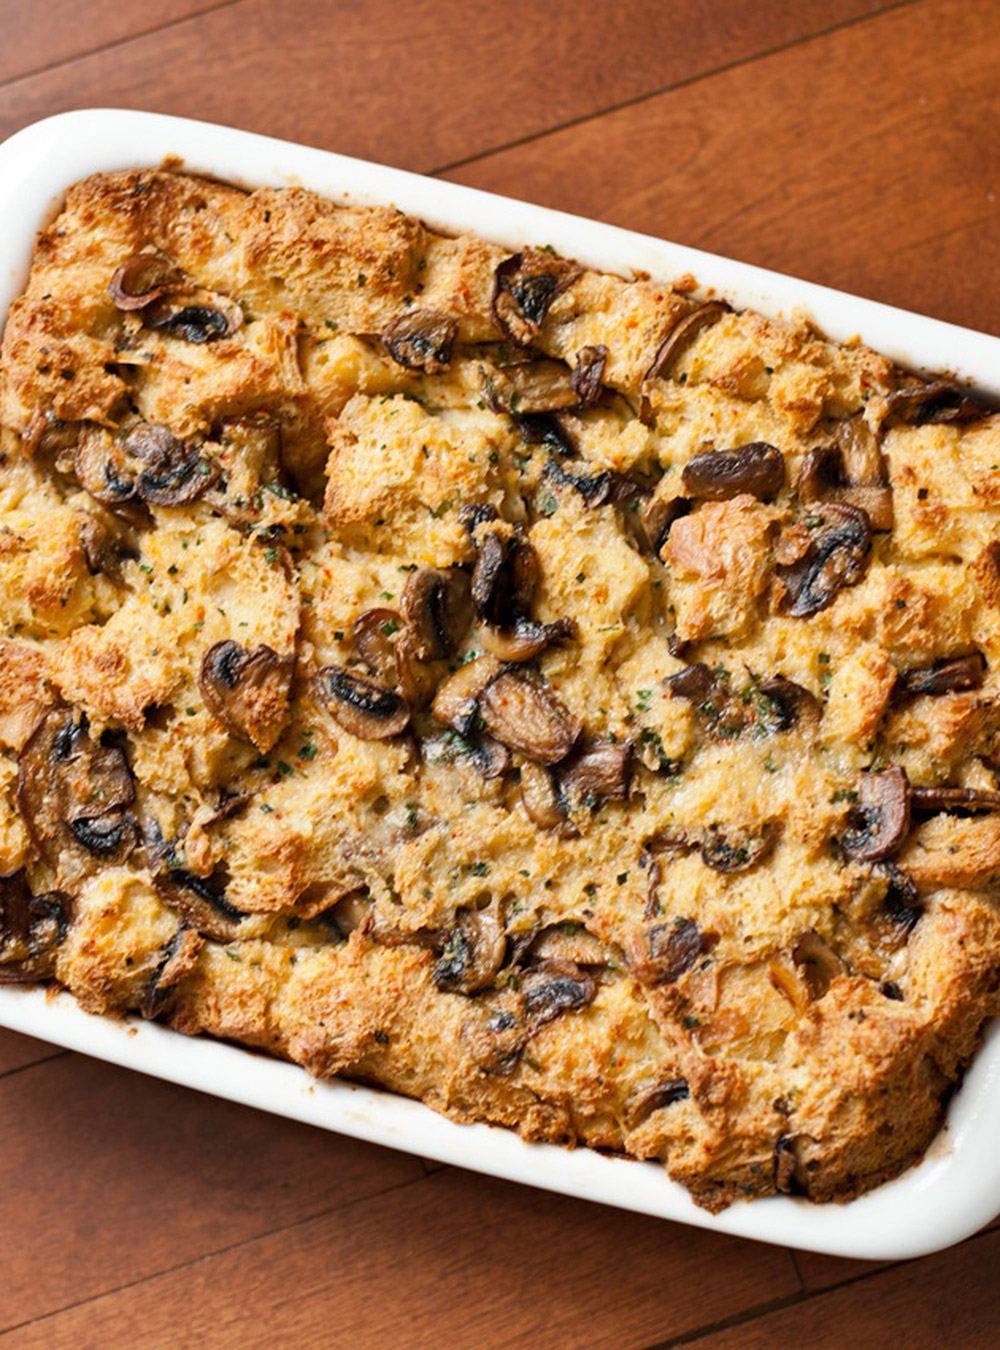 Joël Legendre’s Cheese and Mushroom Bread Pudding